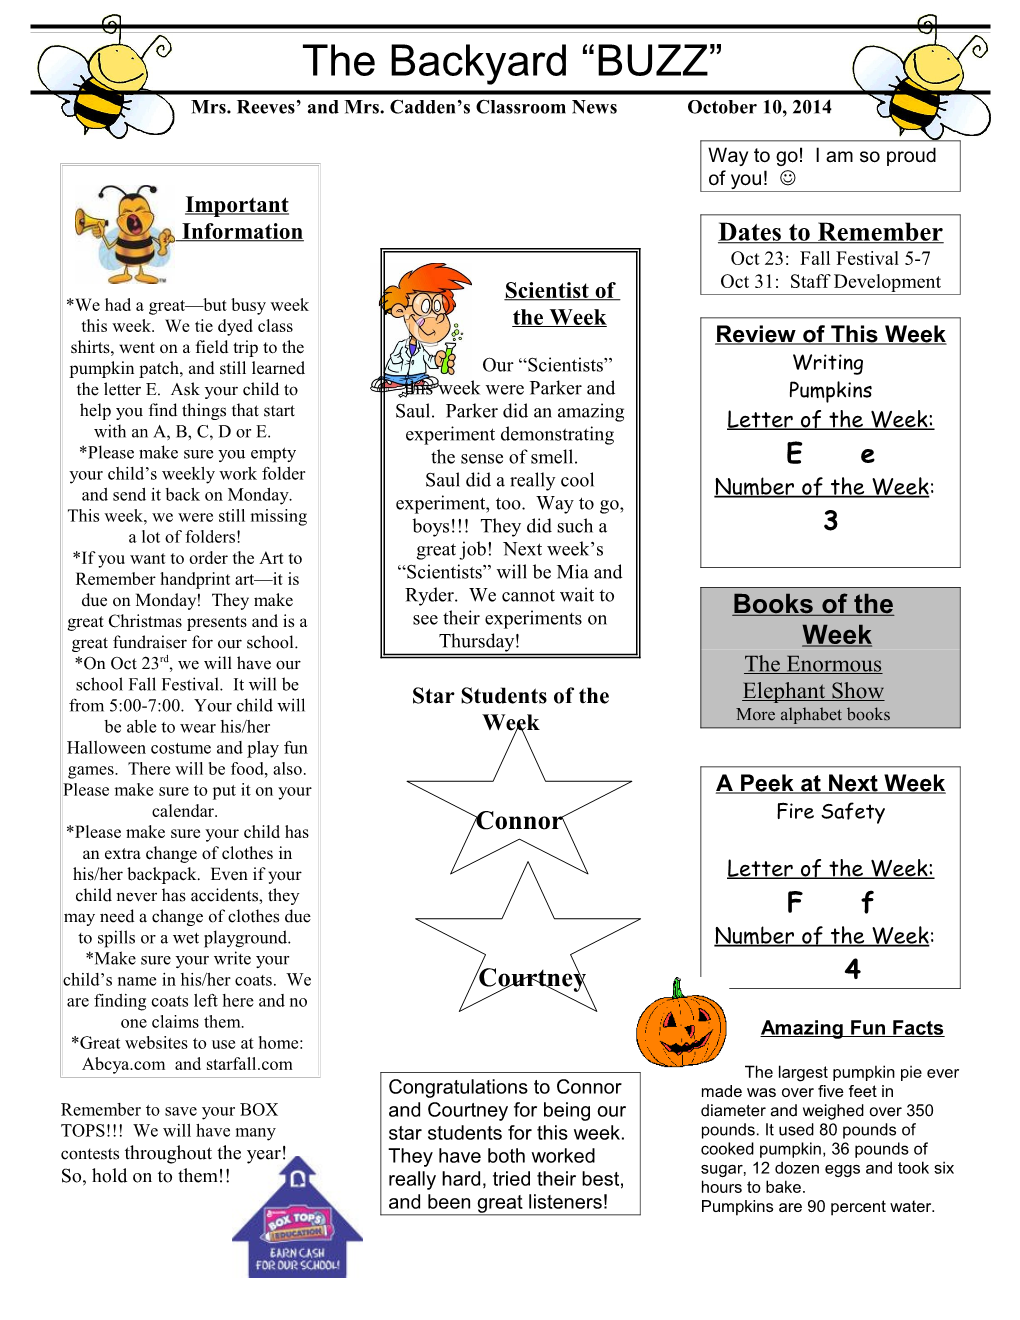 Mrs. Reeves and Mrs. Cadden S Classroom News October 10, 2014